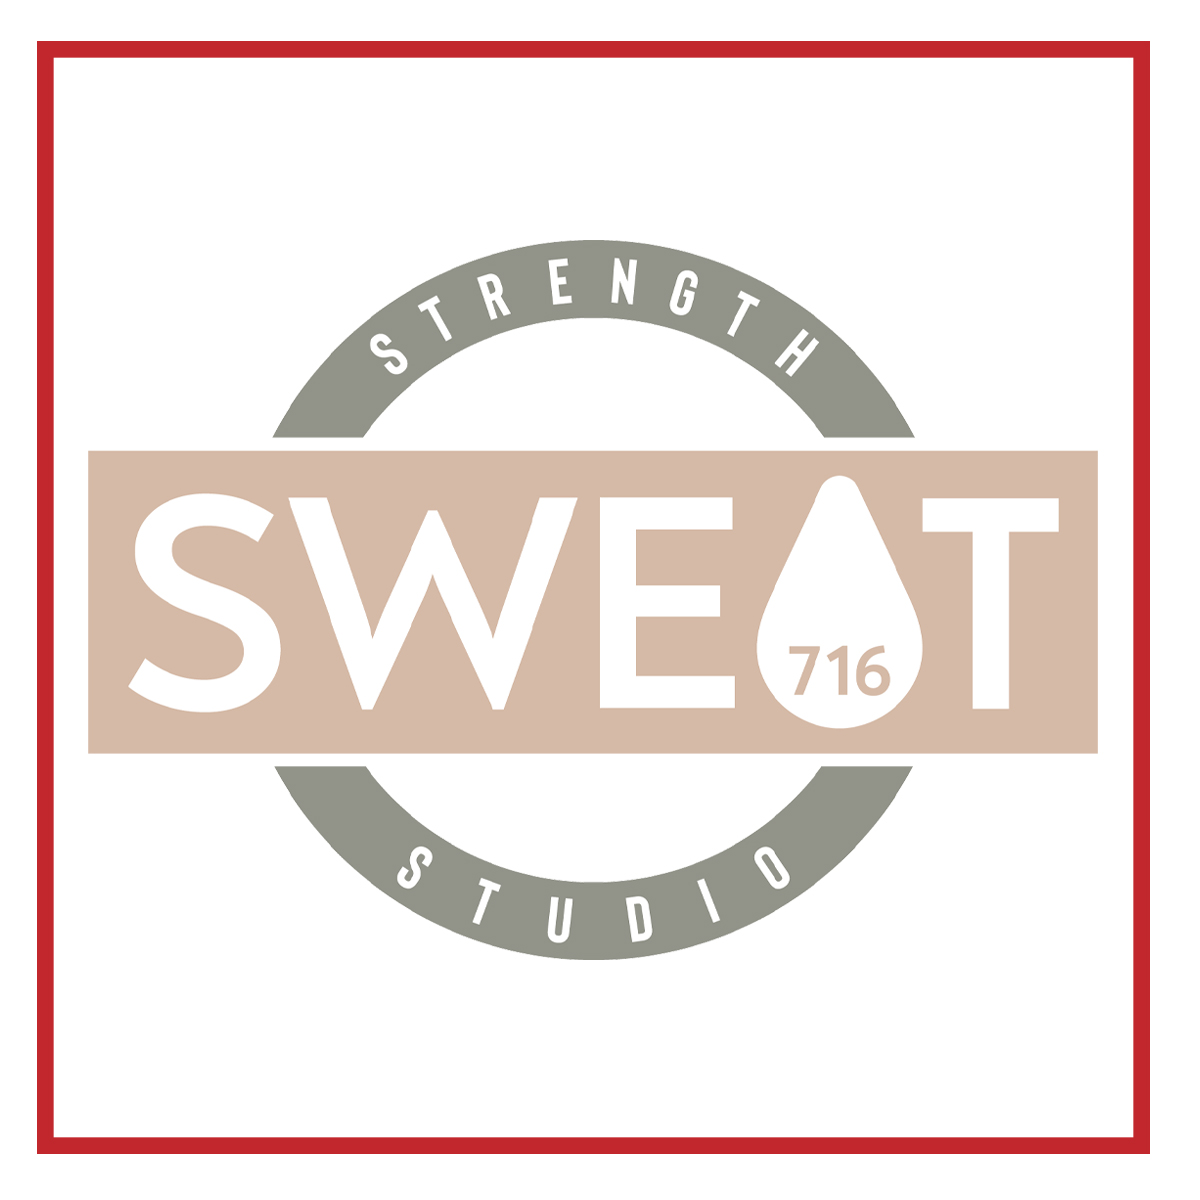 Read more about the article Sweat 716